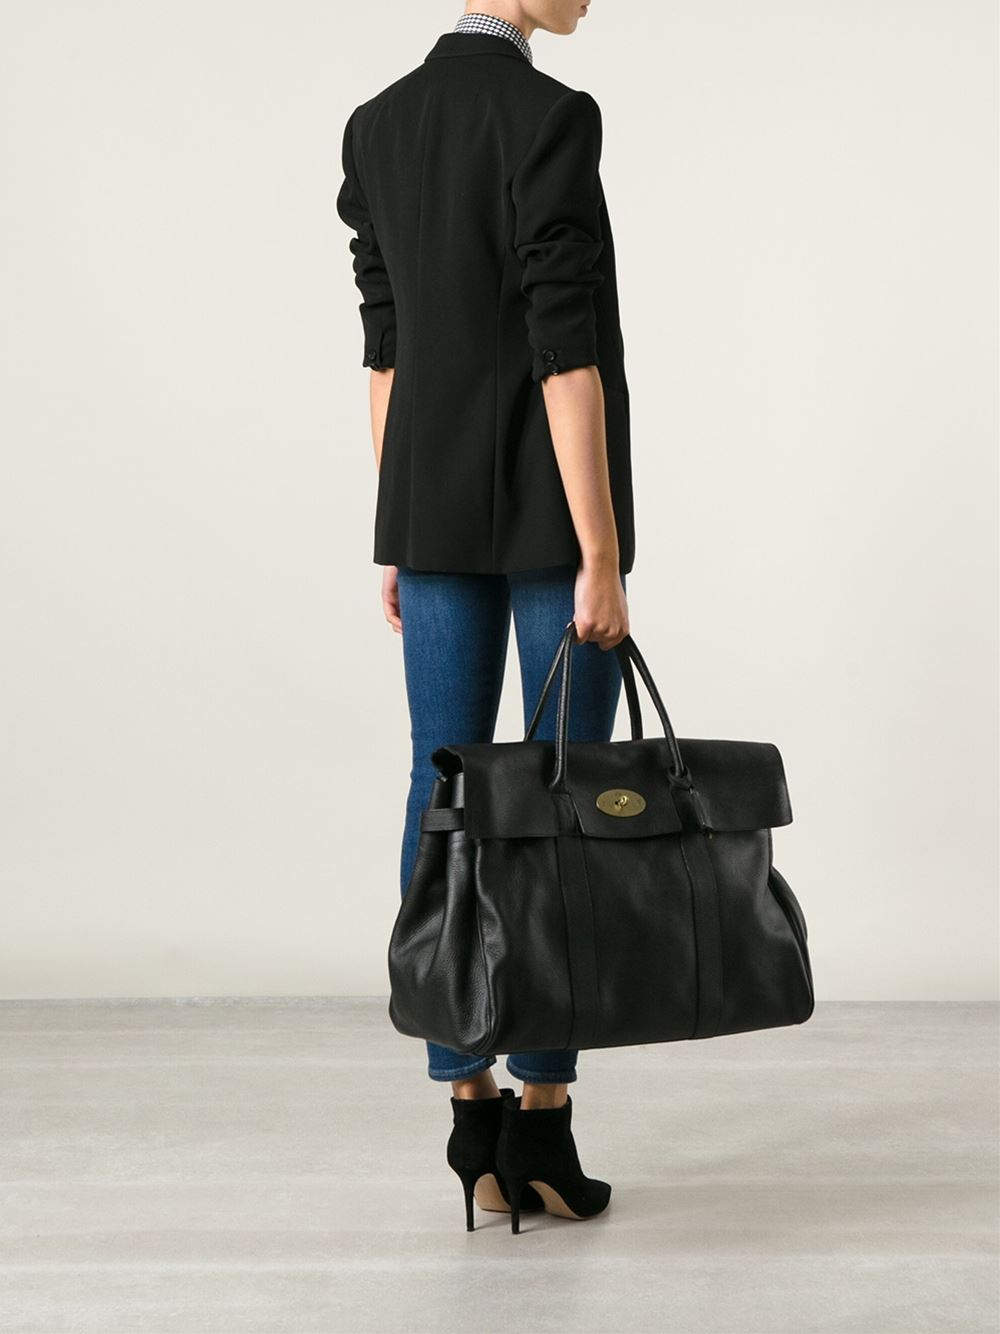 Mulberry Oversized Bayswater Bag in Black - Lyst